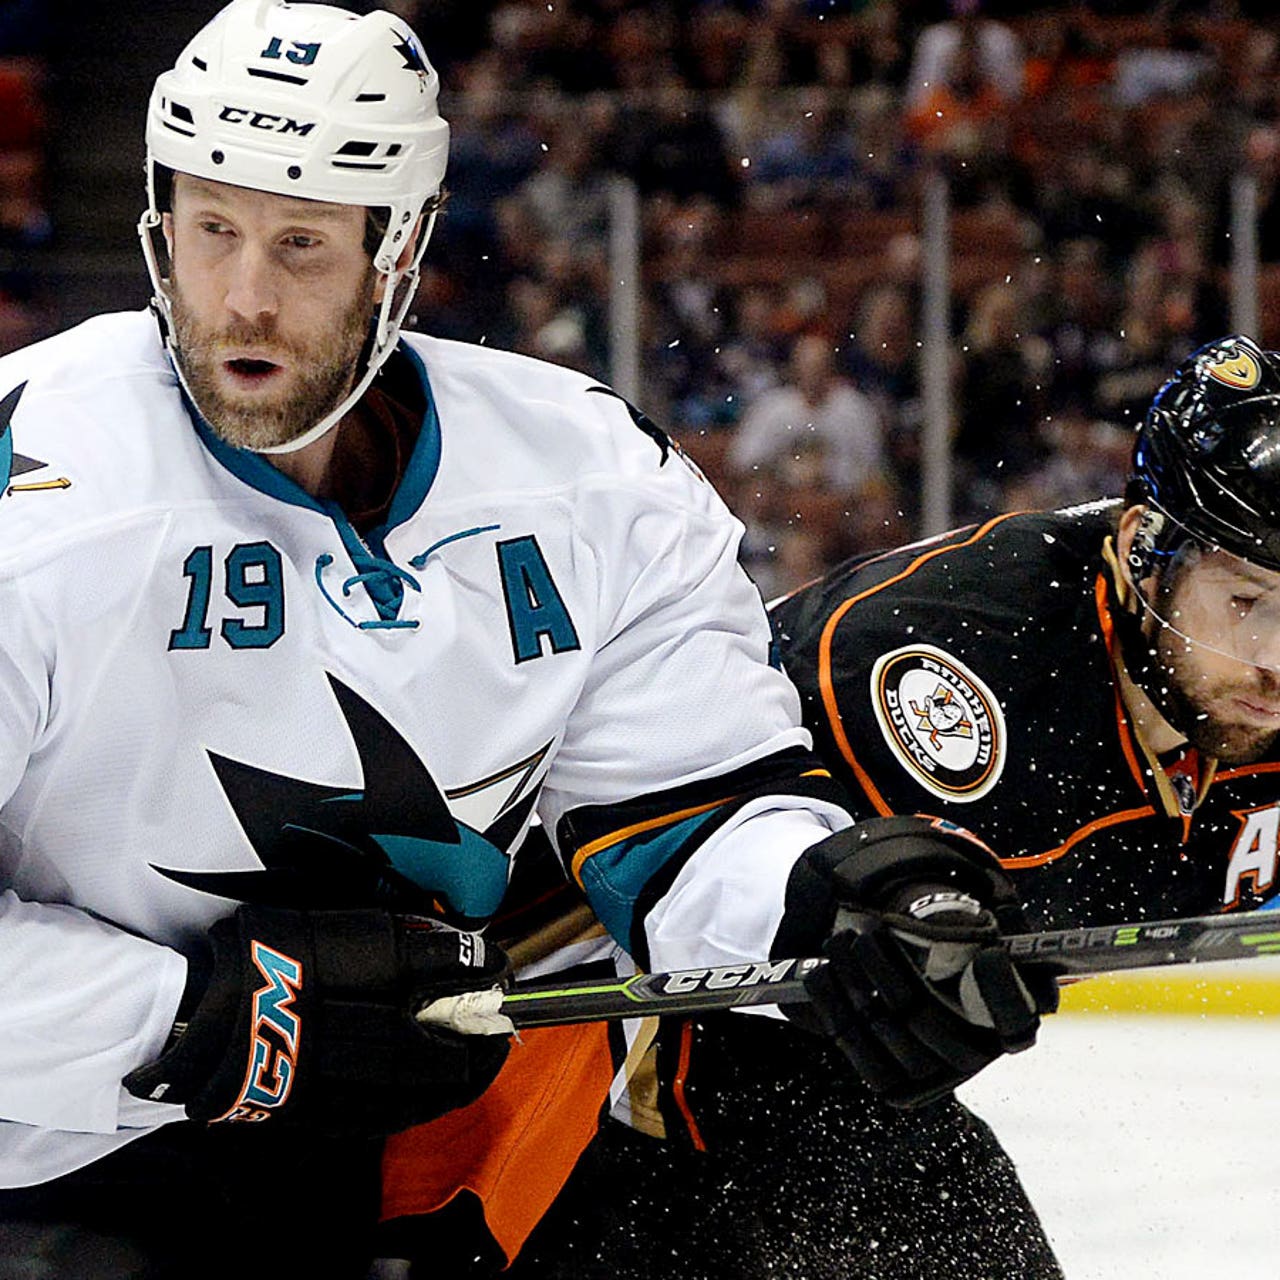 Injured forward Joe Thornton could be X factor for Sharks